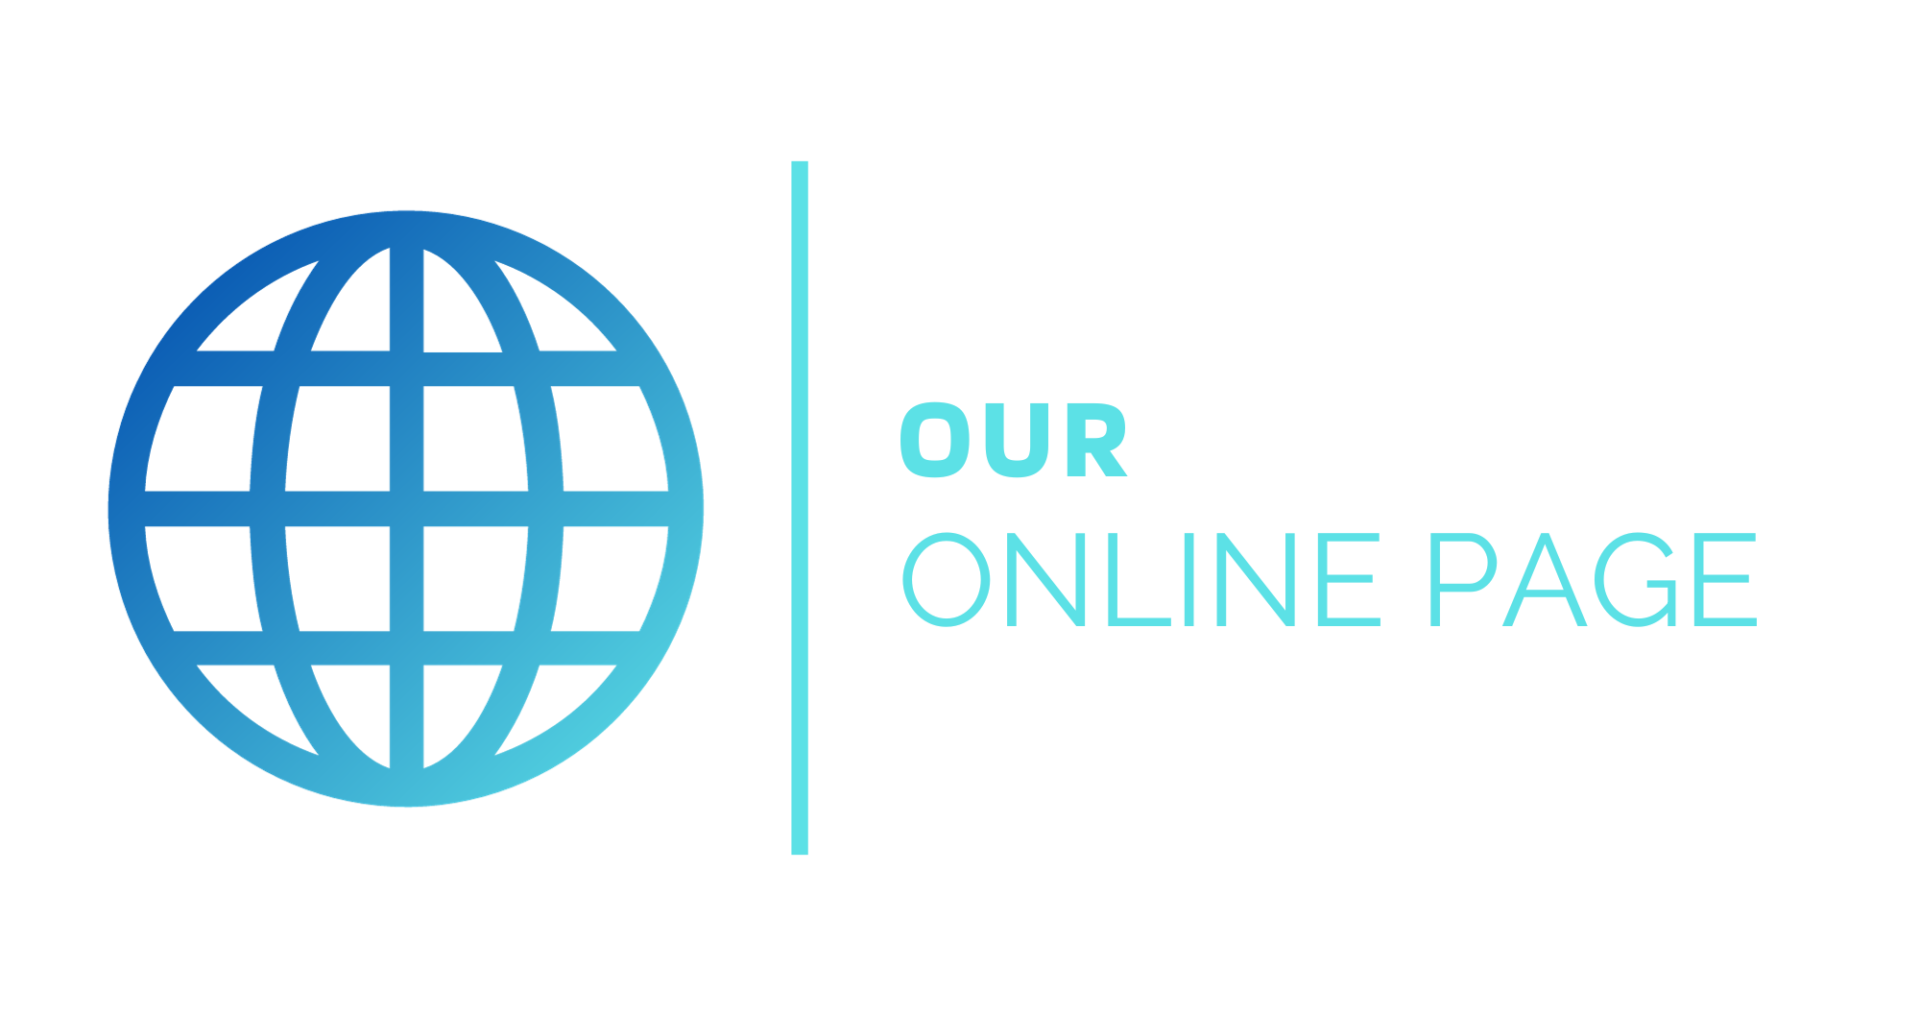 Our Online Page